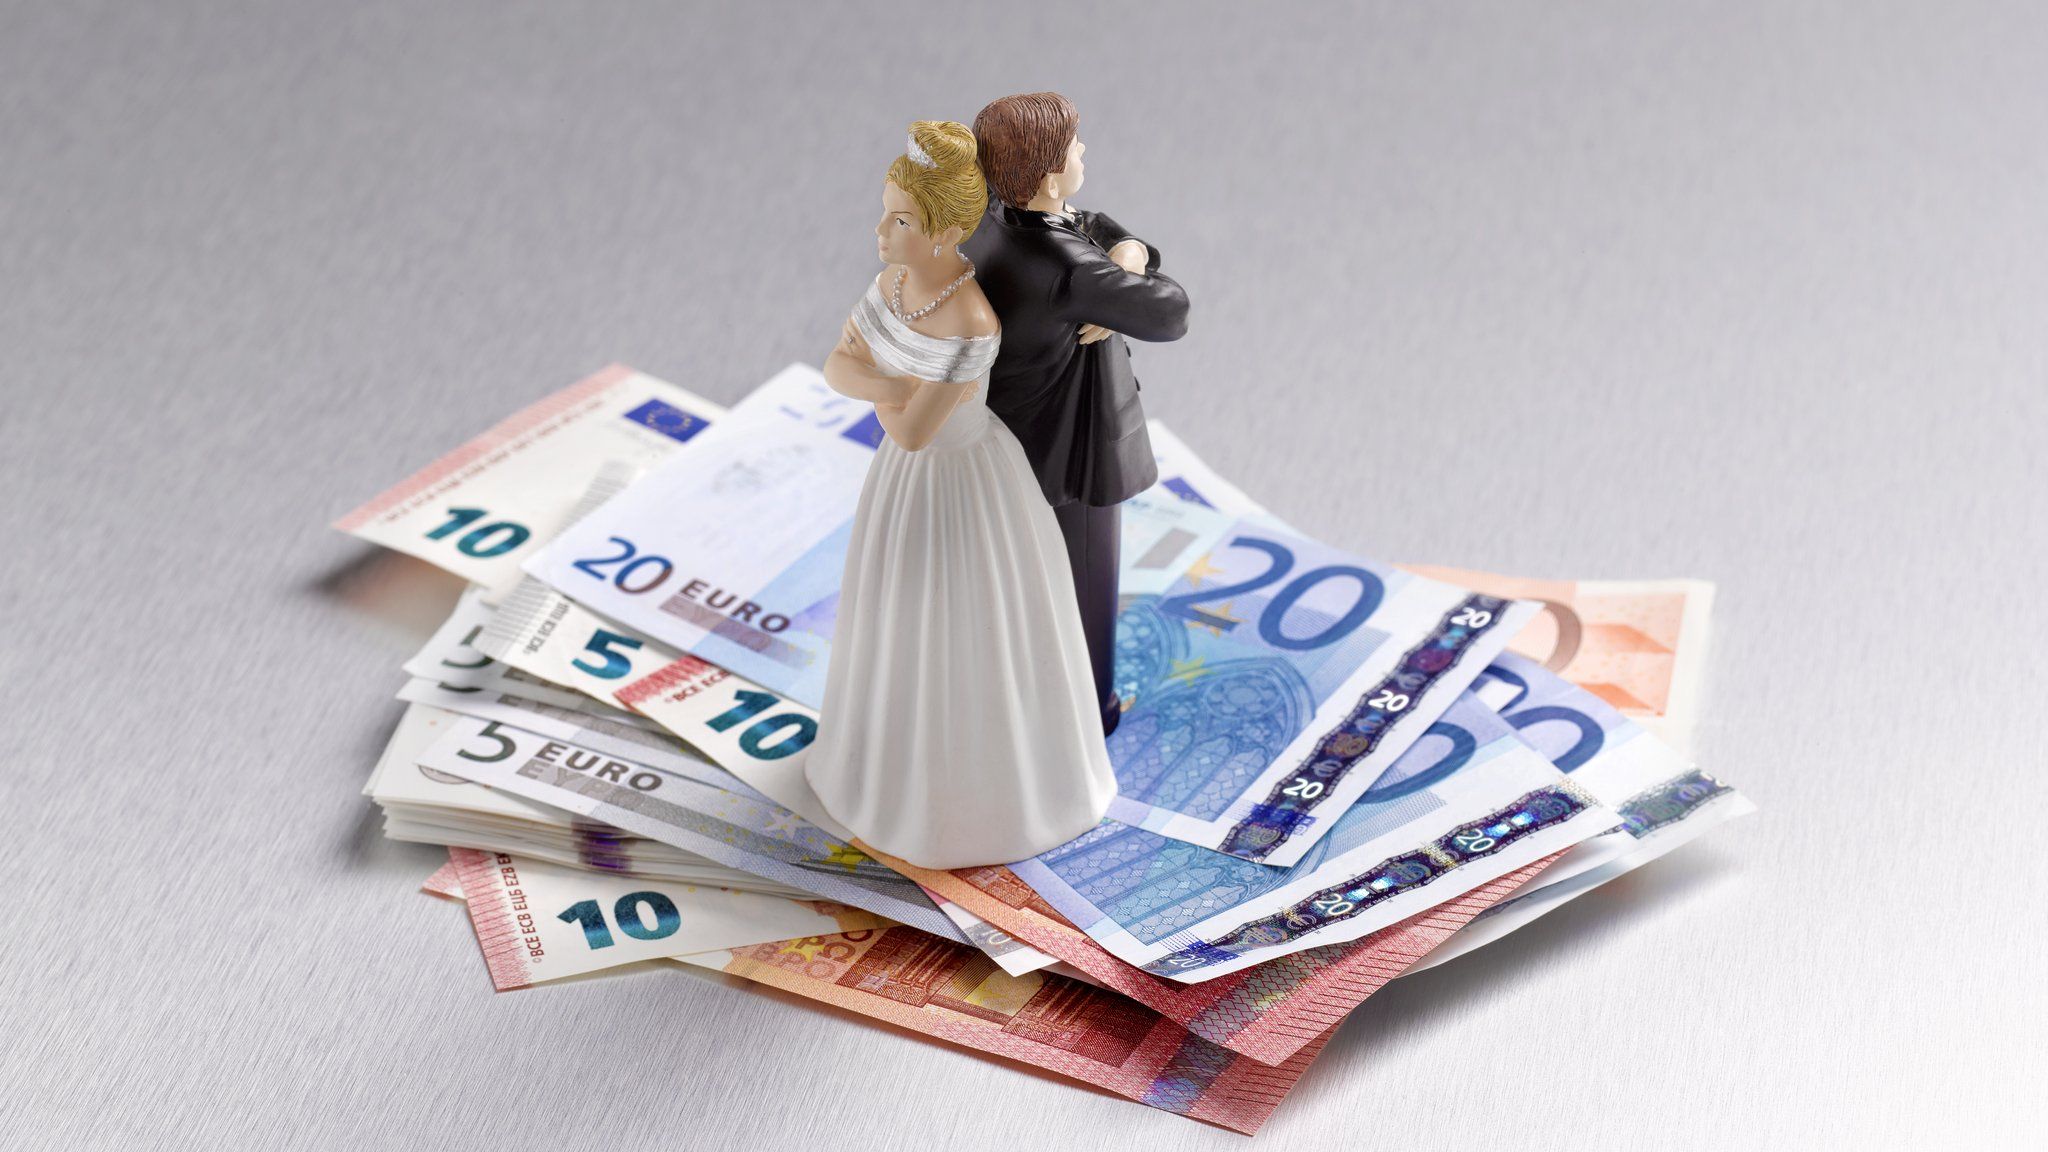 A model of a bride and groom standing on a pile of euros